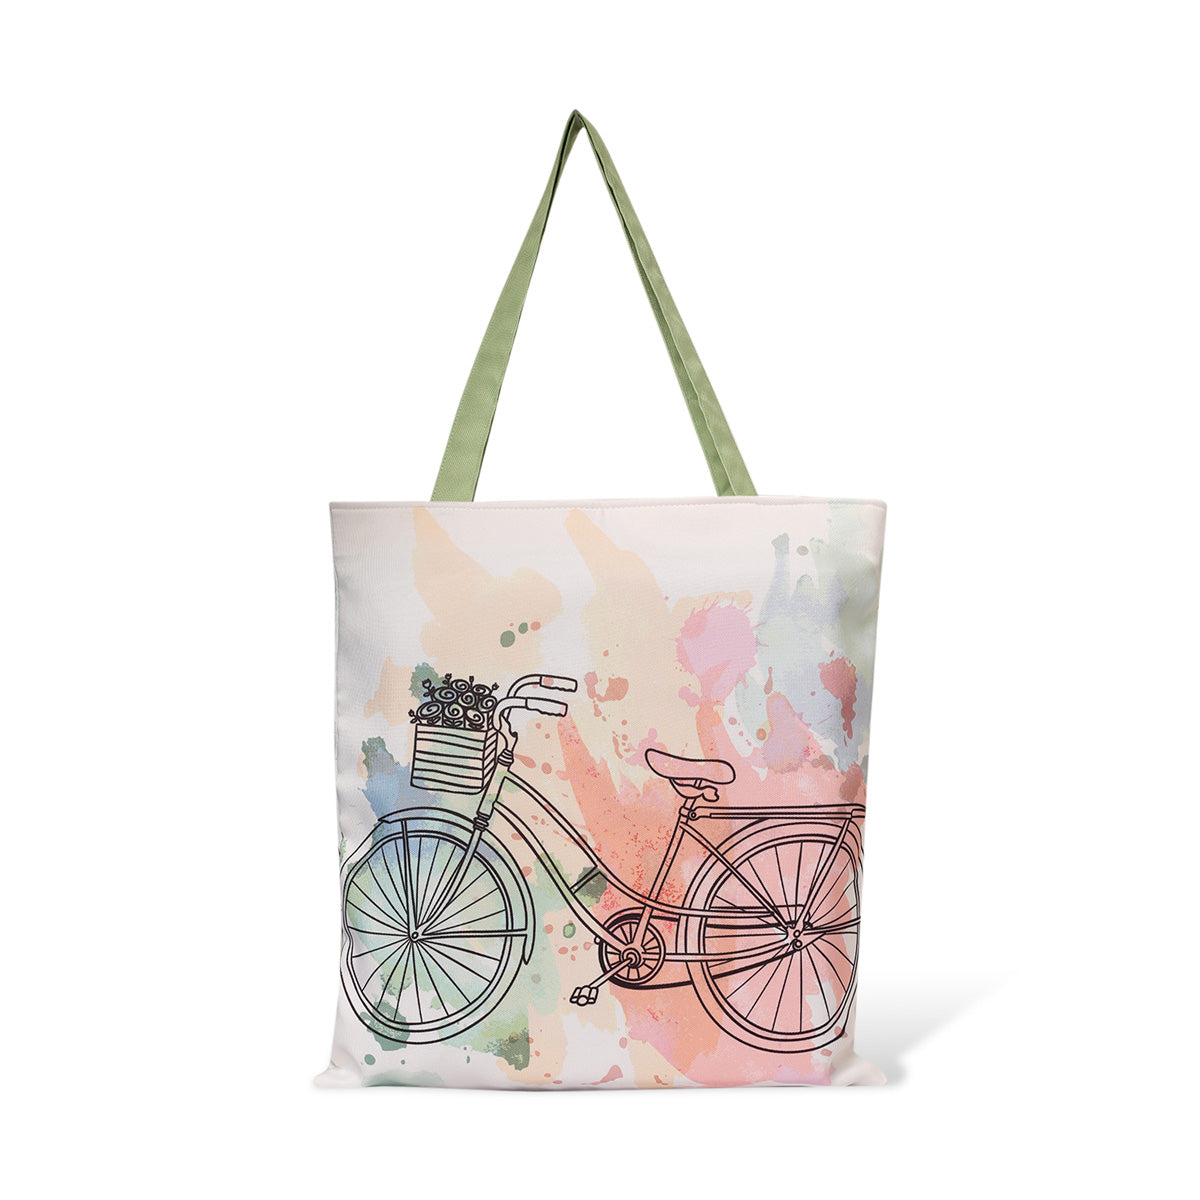 Trendy tote bag with a cute bicycle print, ideal for adding a pop of fun to your outfit.